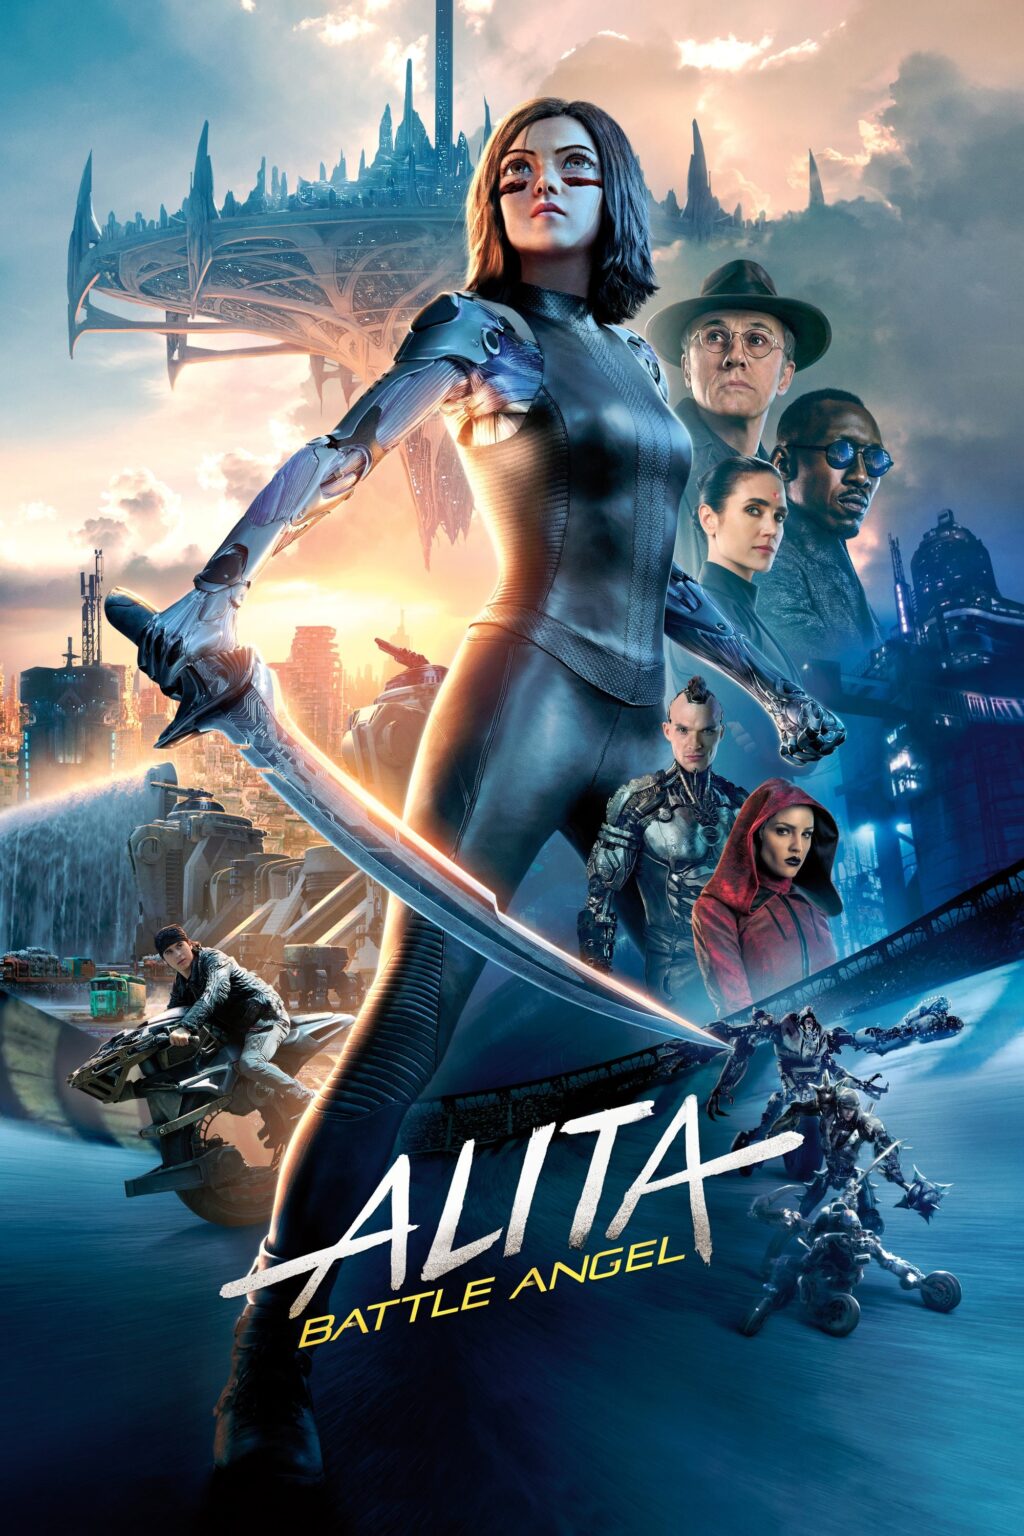 Poster for the movie "Alita: Battle Angel"